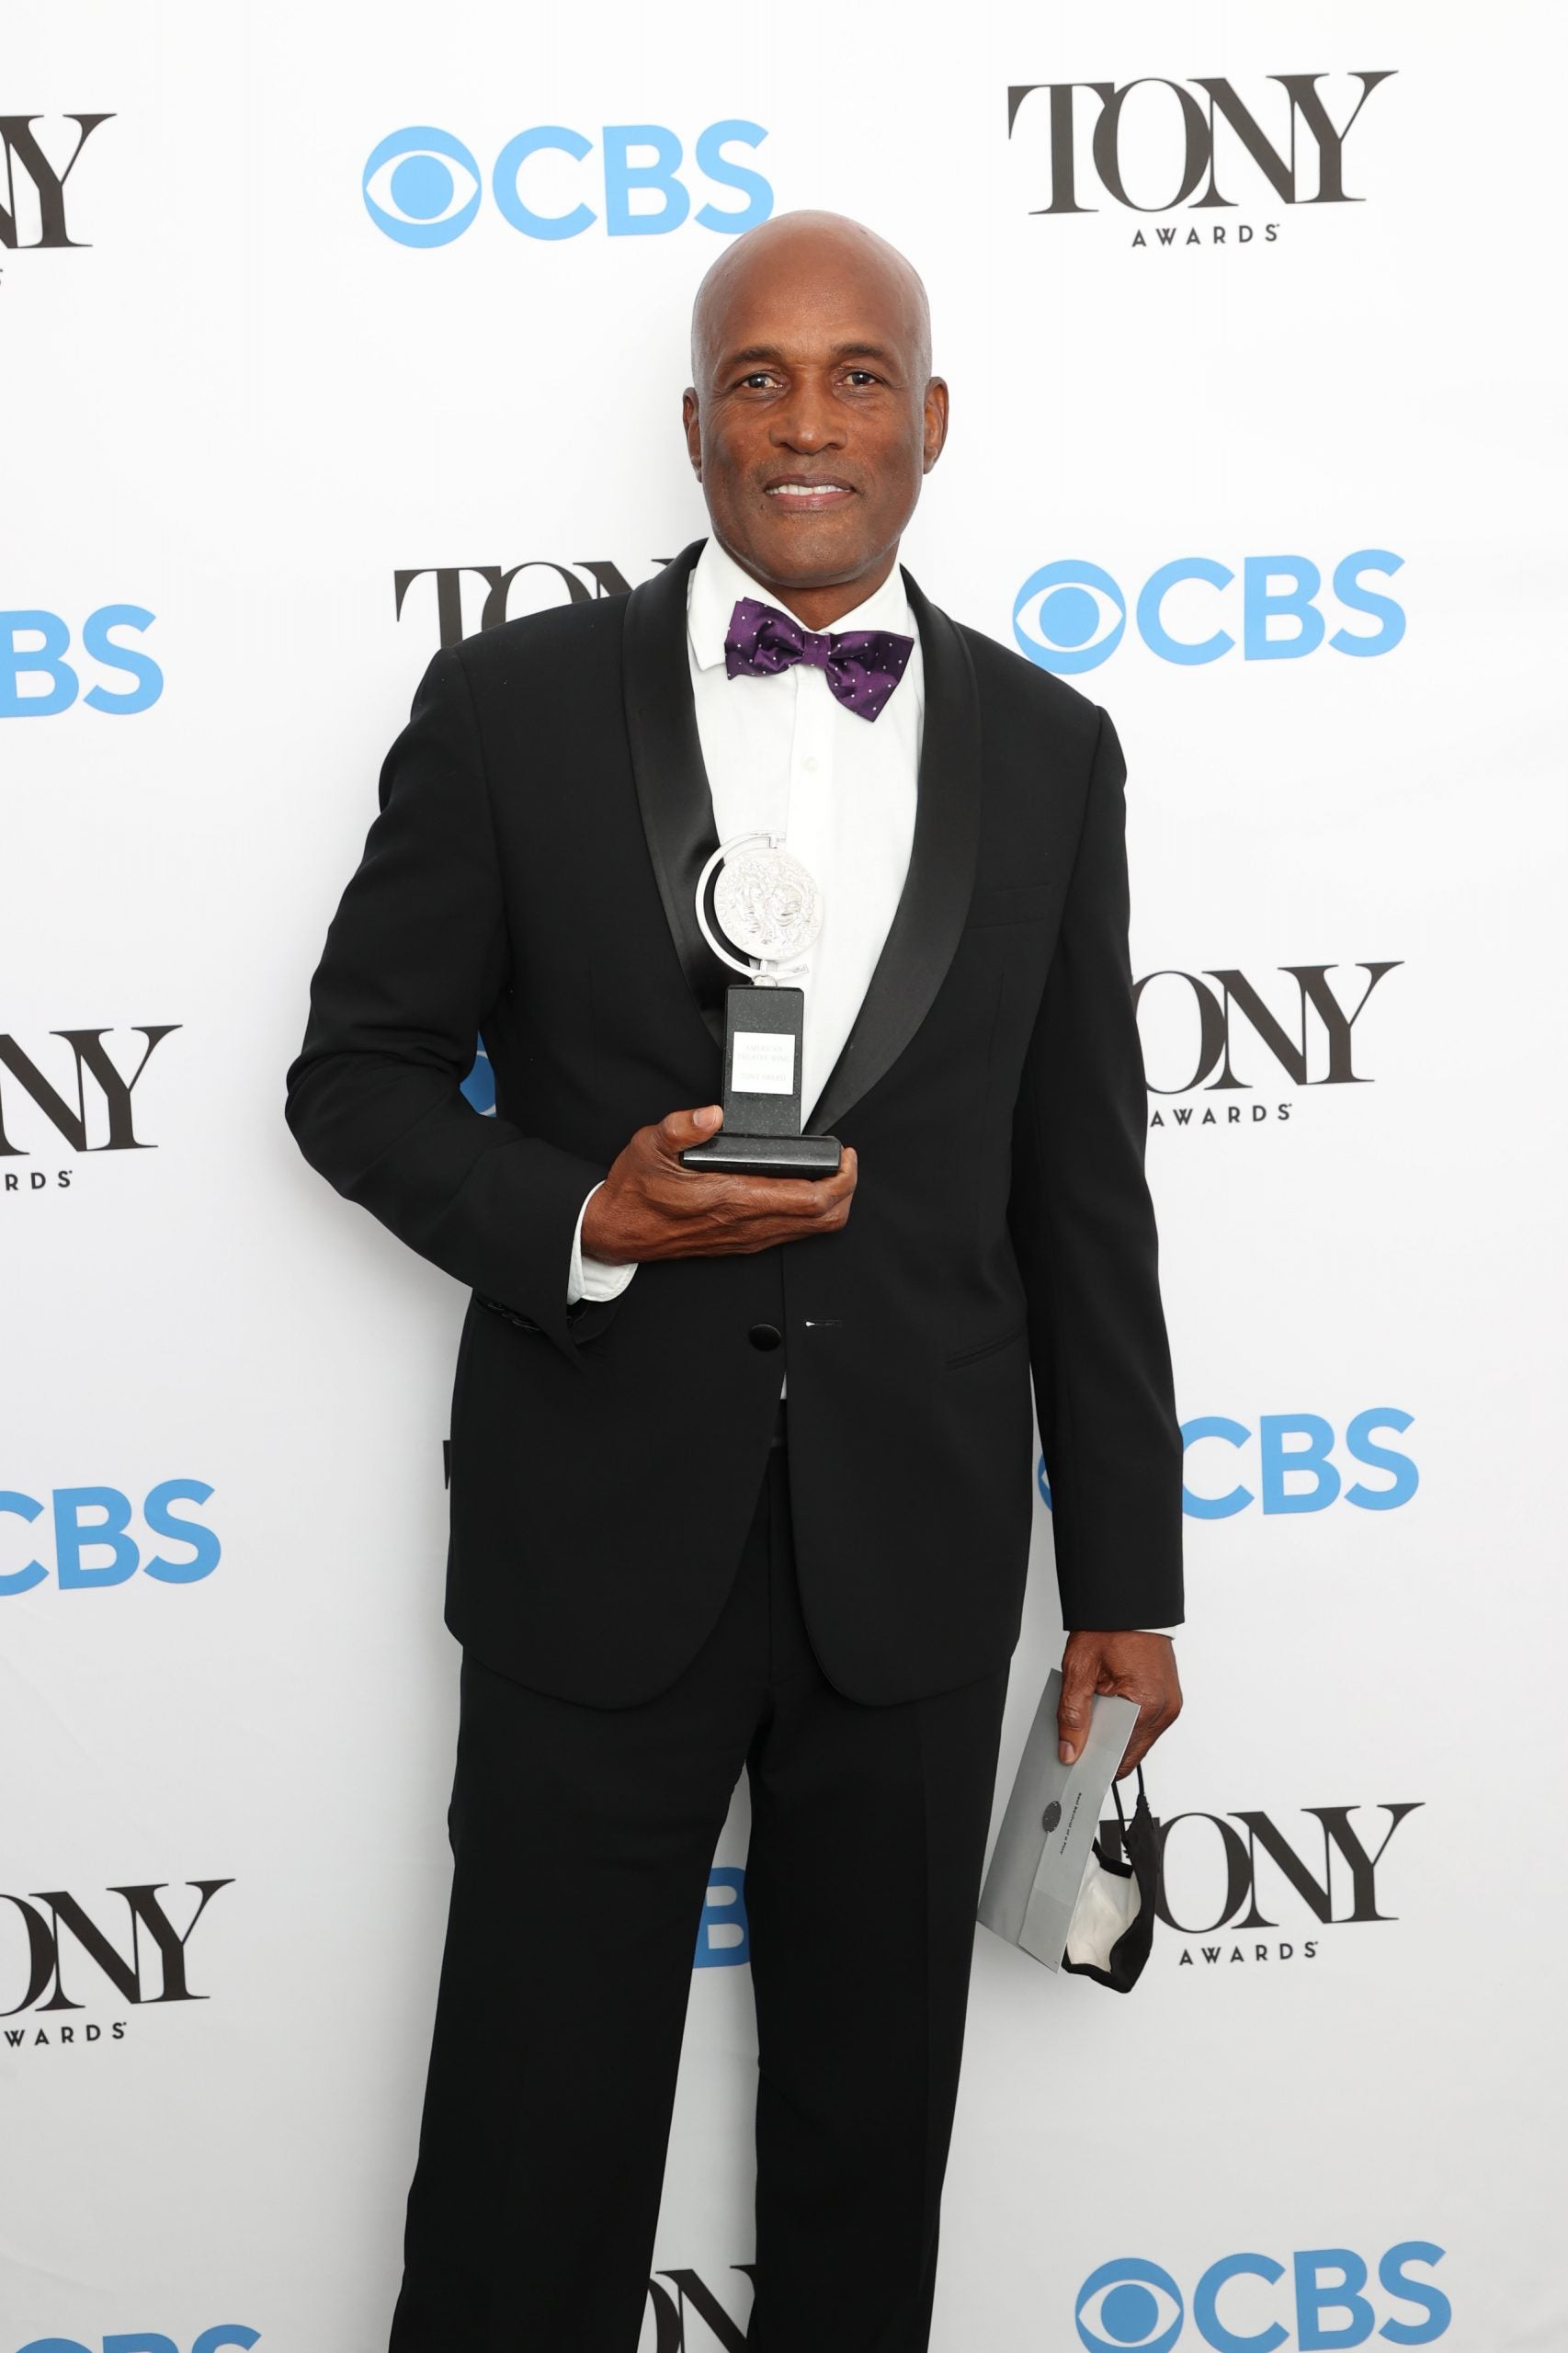 Black & Excellent Winners at the 74th Annual Tony Awards